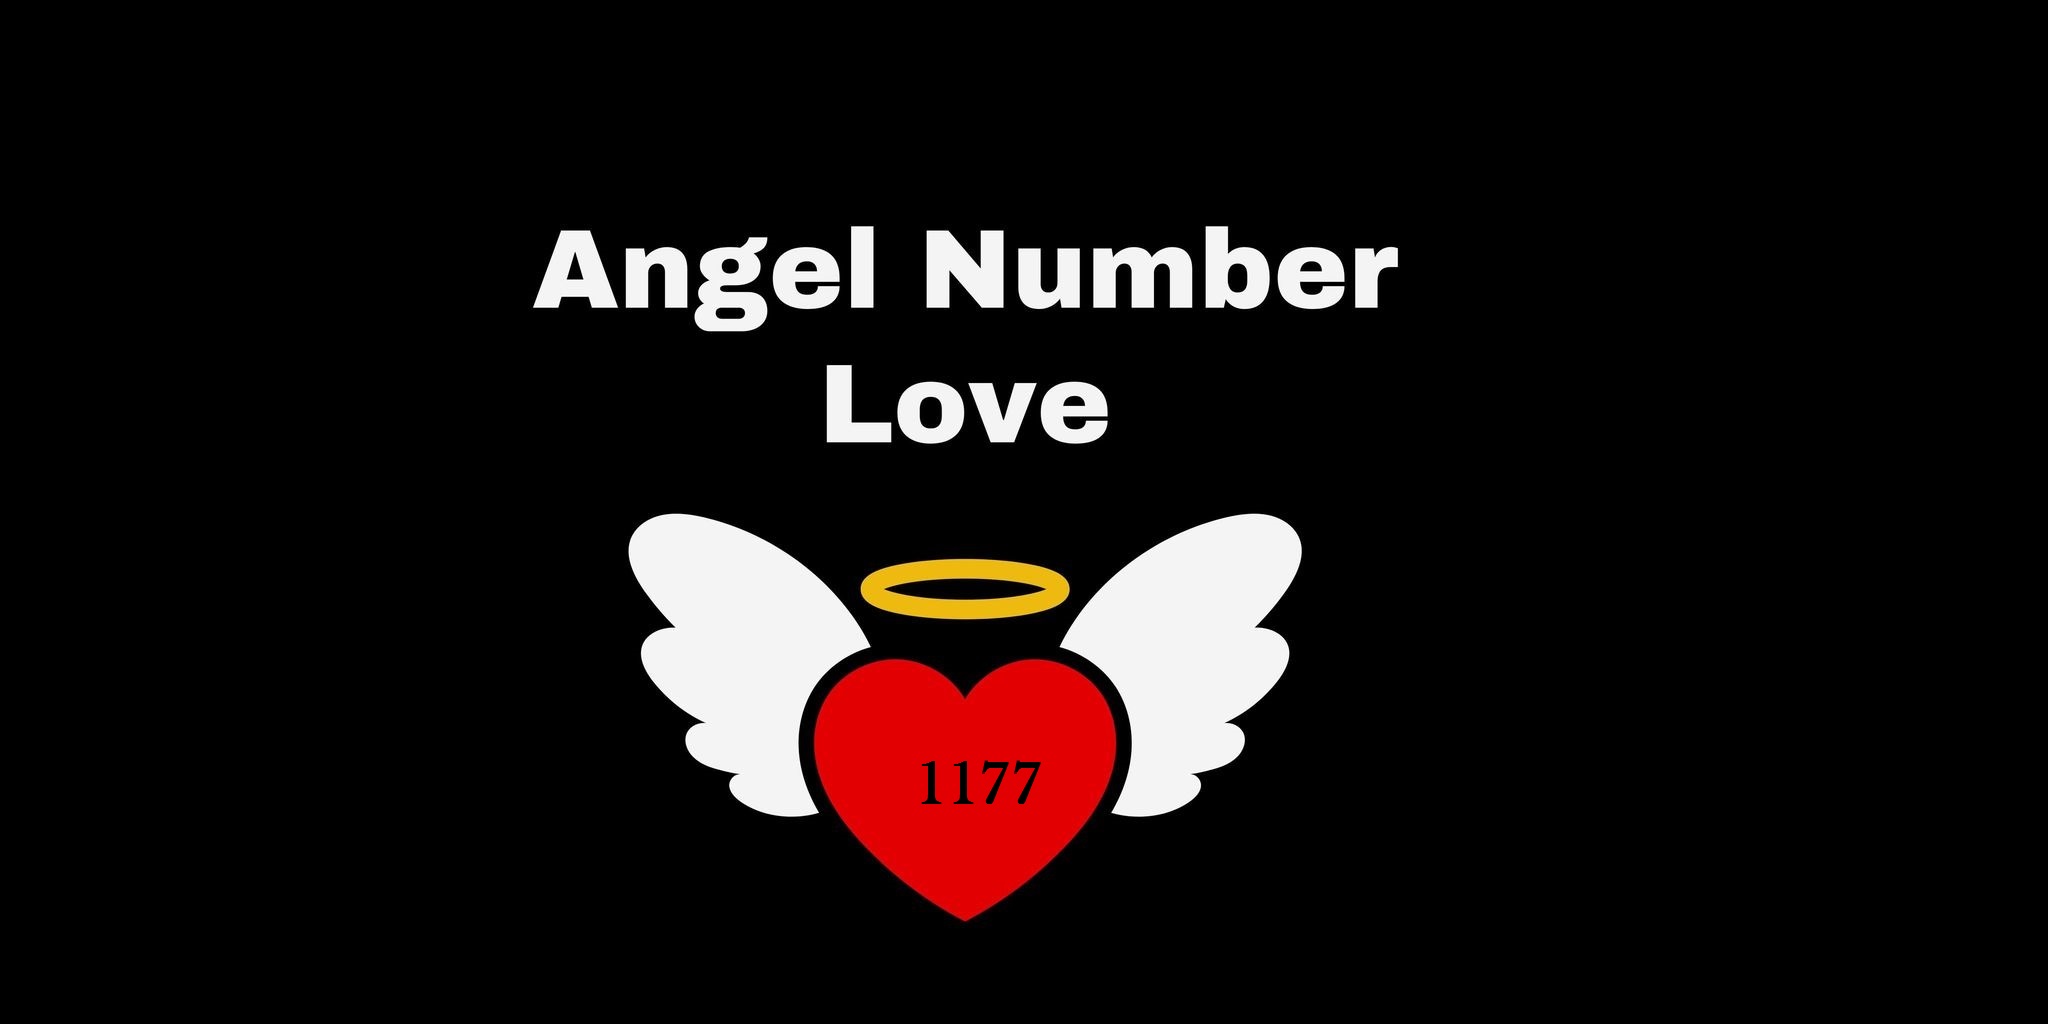 1177 Angel Number Meaning In Love